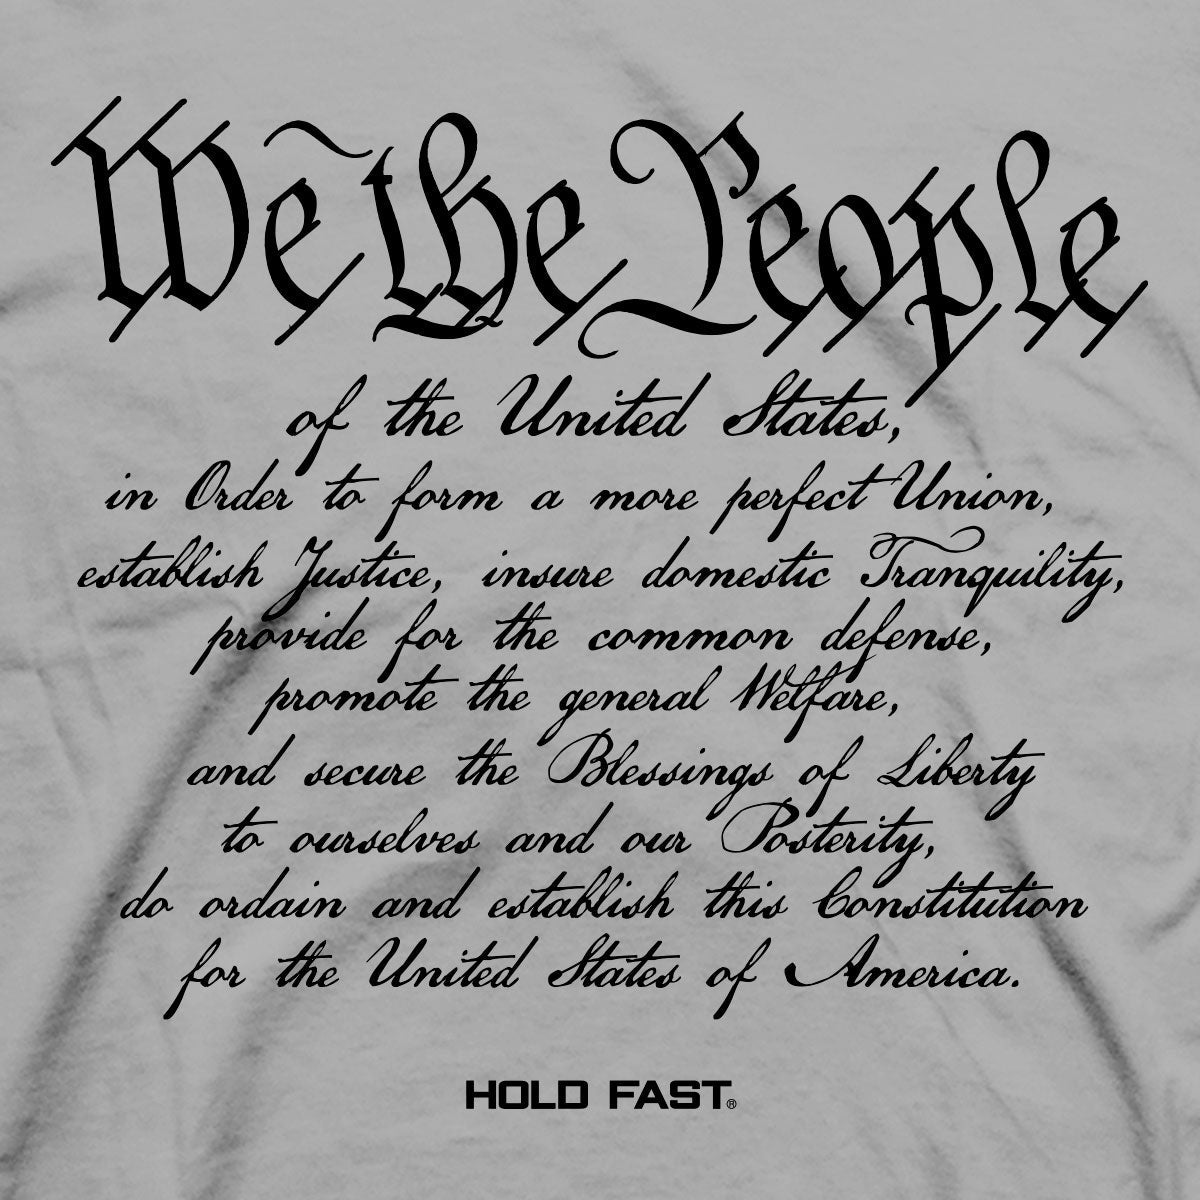 Hold Fast Mens T-Shirt We The People | 2FruitBearers